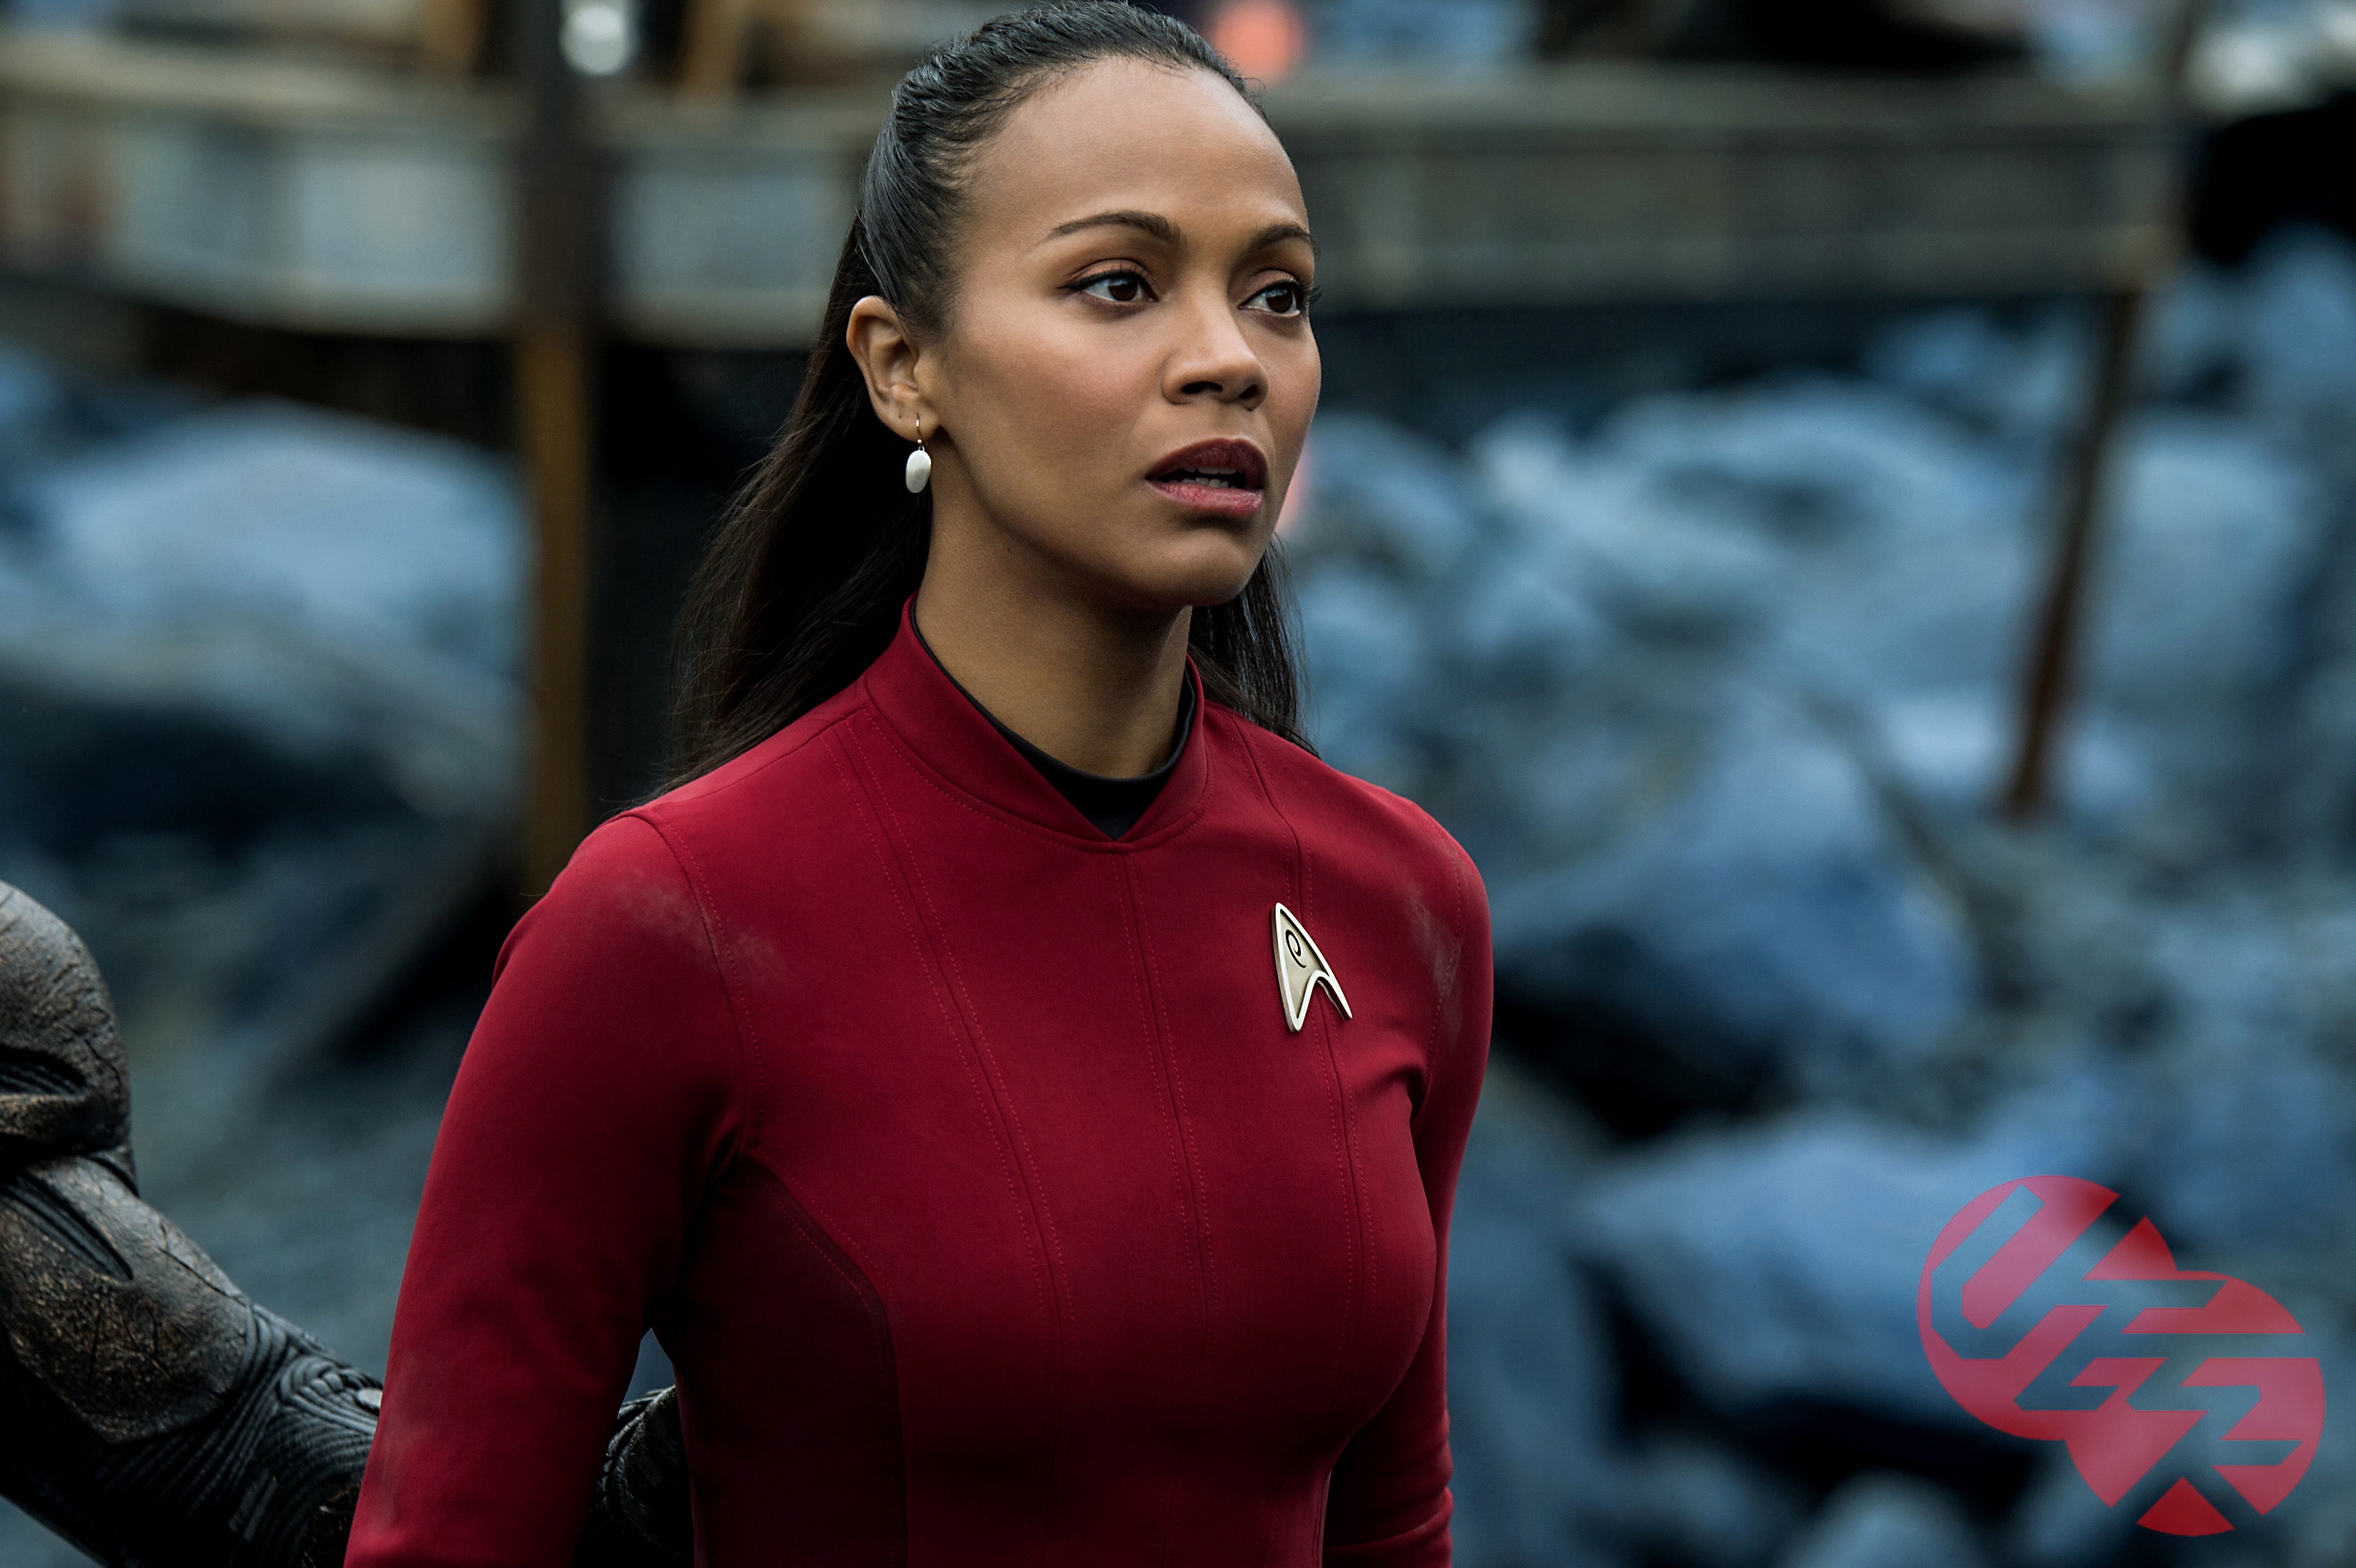 Zoë Saldana plays Uhura in Star Trek Beyond from Paramount Pictures, Skydance, Bad Robot, Sneaky Shark and Perfect Storm Entertainment